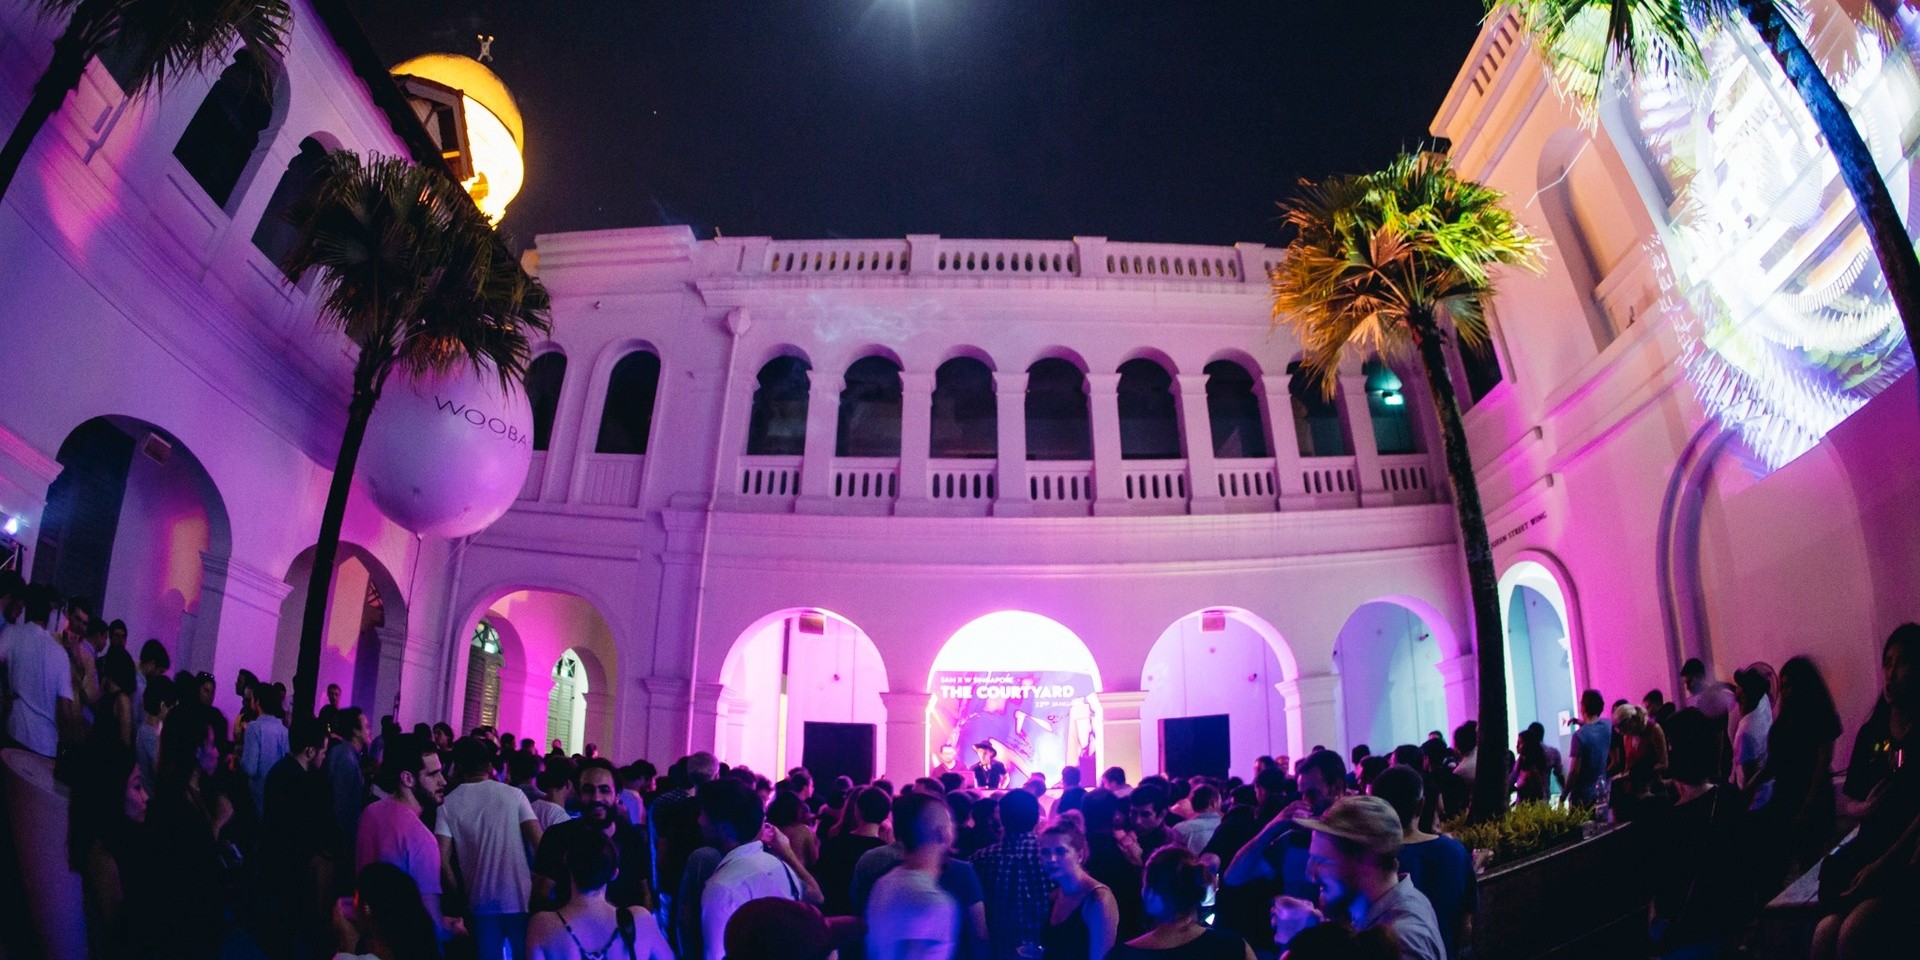 Singapore Art Museum will play host to a series of bands and DJs to close Singapore Biennale 2016 